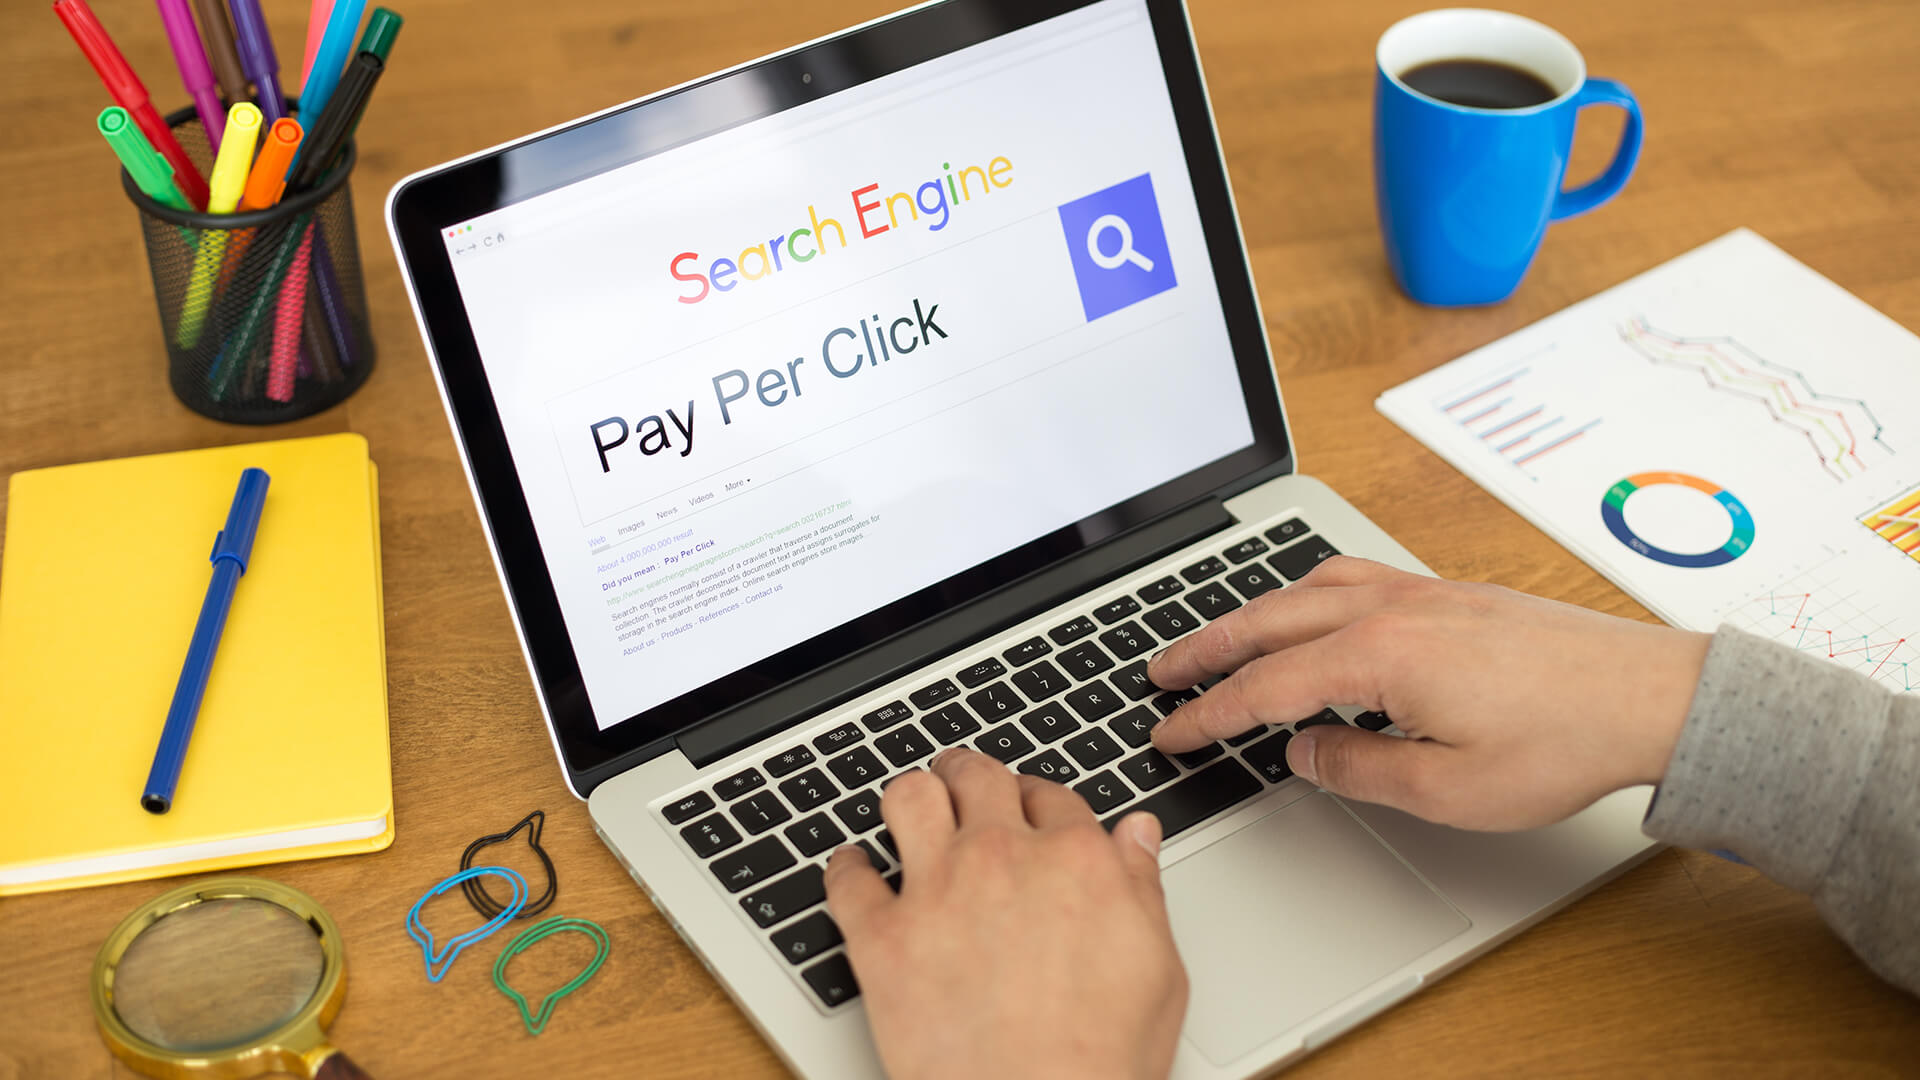 ppc-pay-per-click-search-ads-laptop-ss-1920